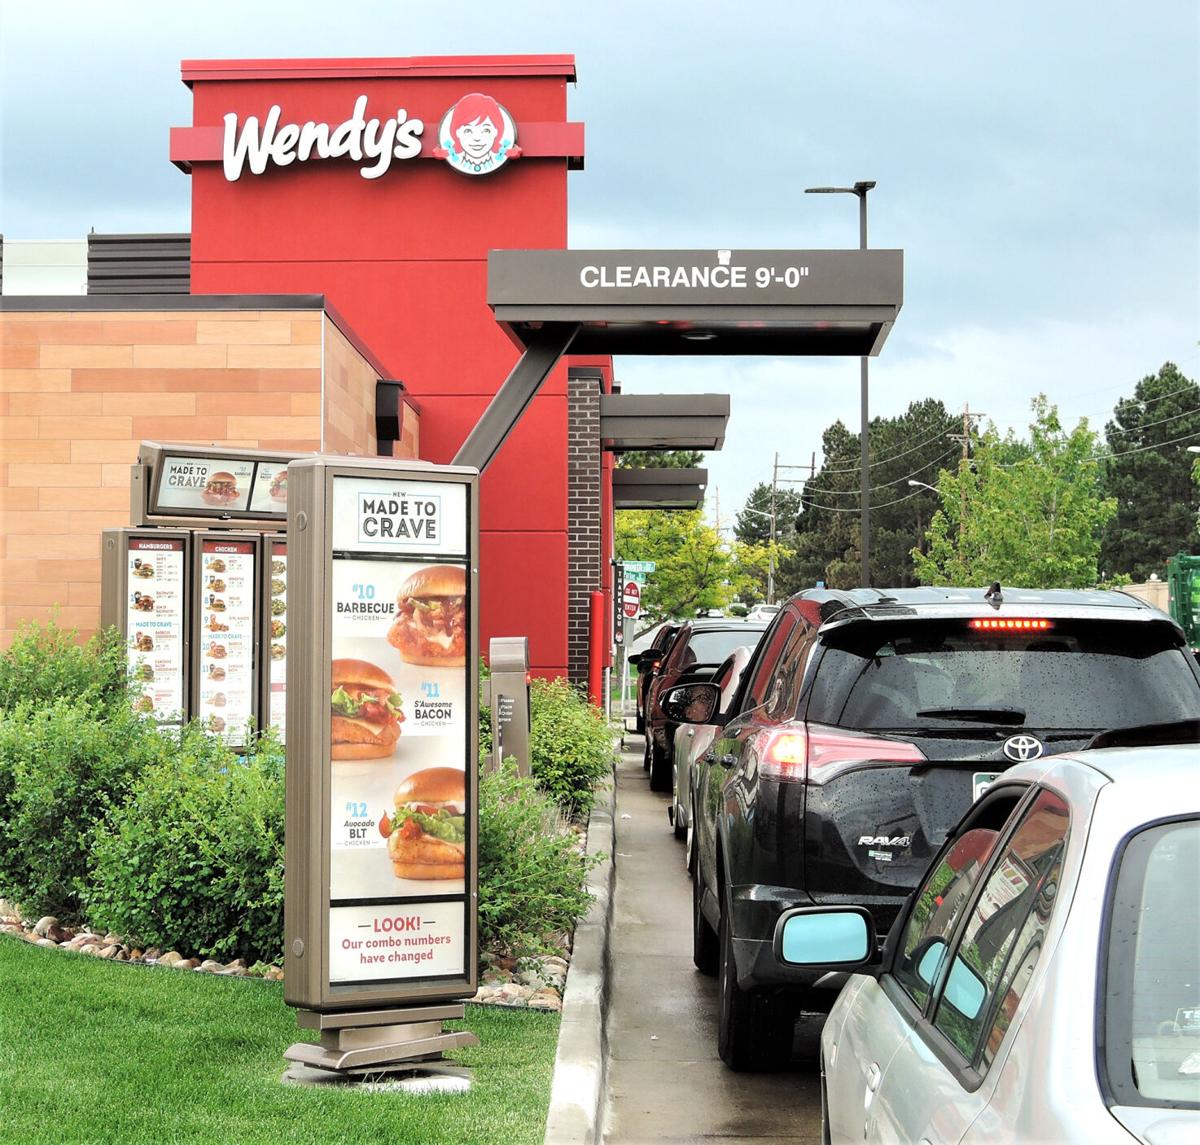 Wendy's chain reduces the queues on the drive thru at Buckinghamshire store thanks to the drive-thru handle